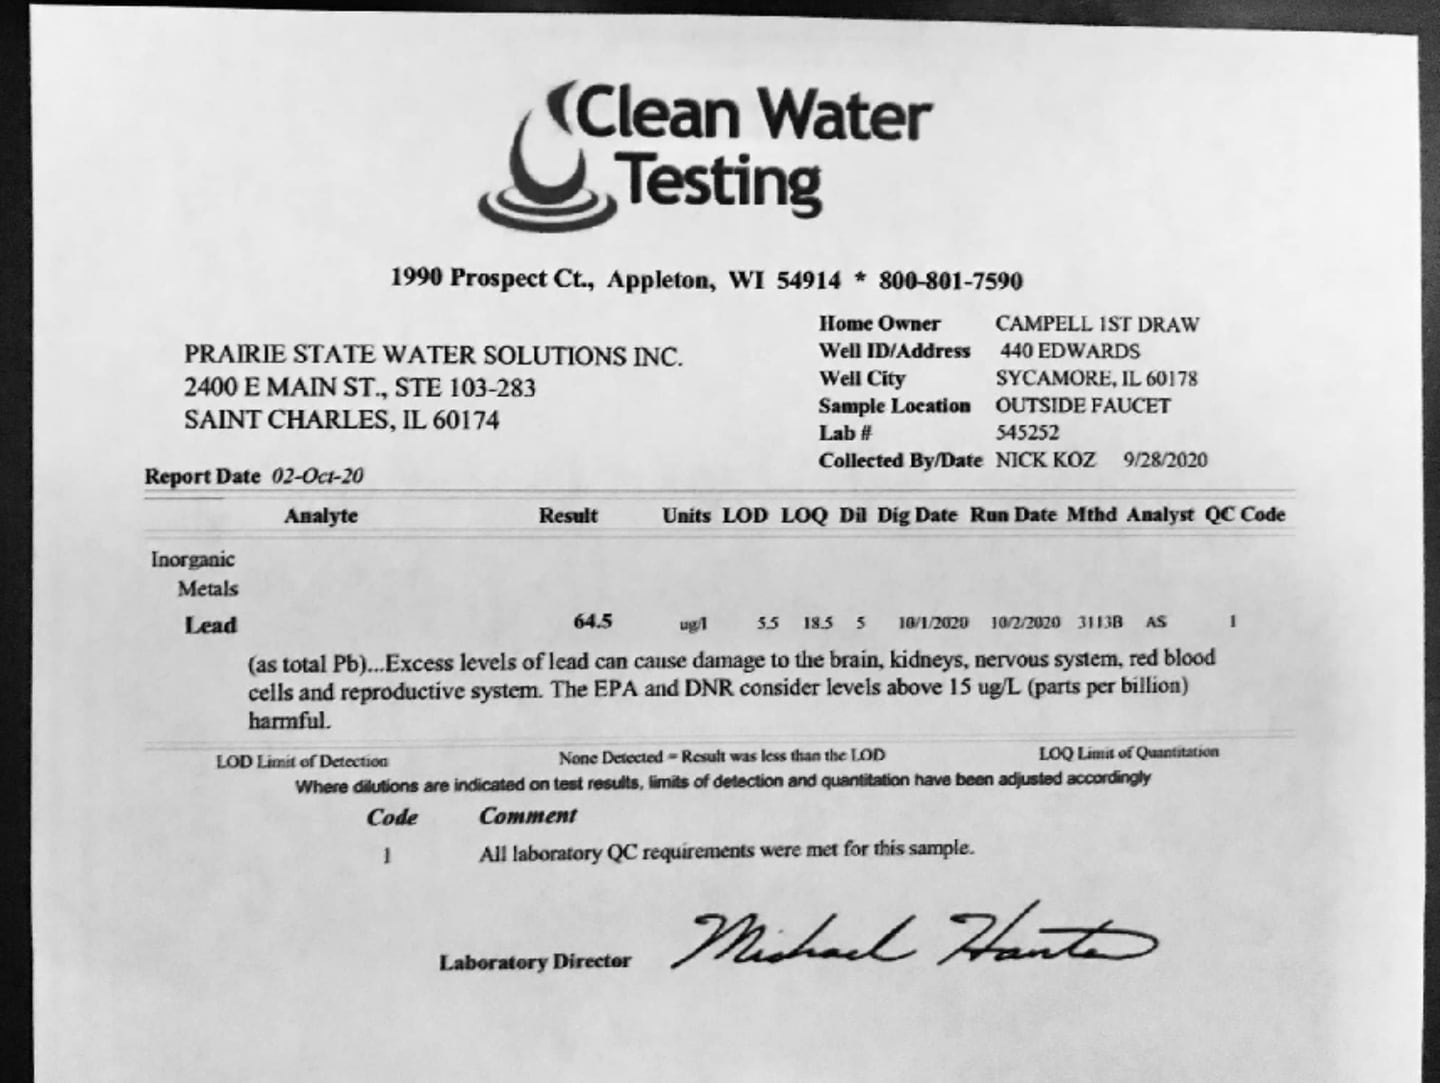 Sycamore residents water quality results show high levels of lead from tests conducted by EPA-certified Prairie State Water Solutions, Inc. while test results from an EPA-certified, Geneva-based lab commissioned by the City of Sycamore show safe lead levels.